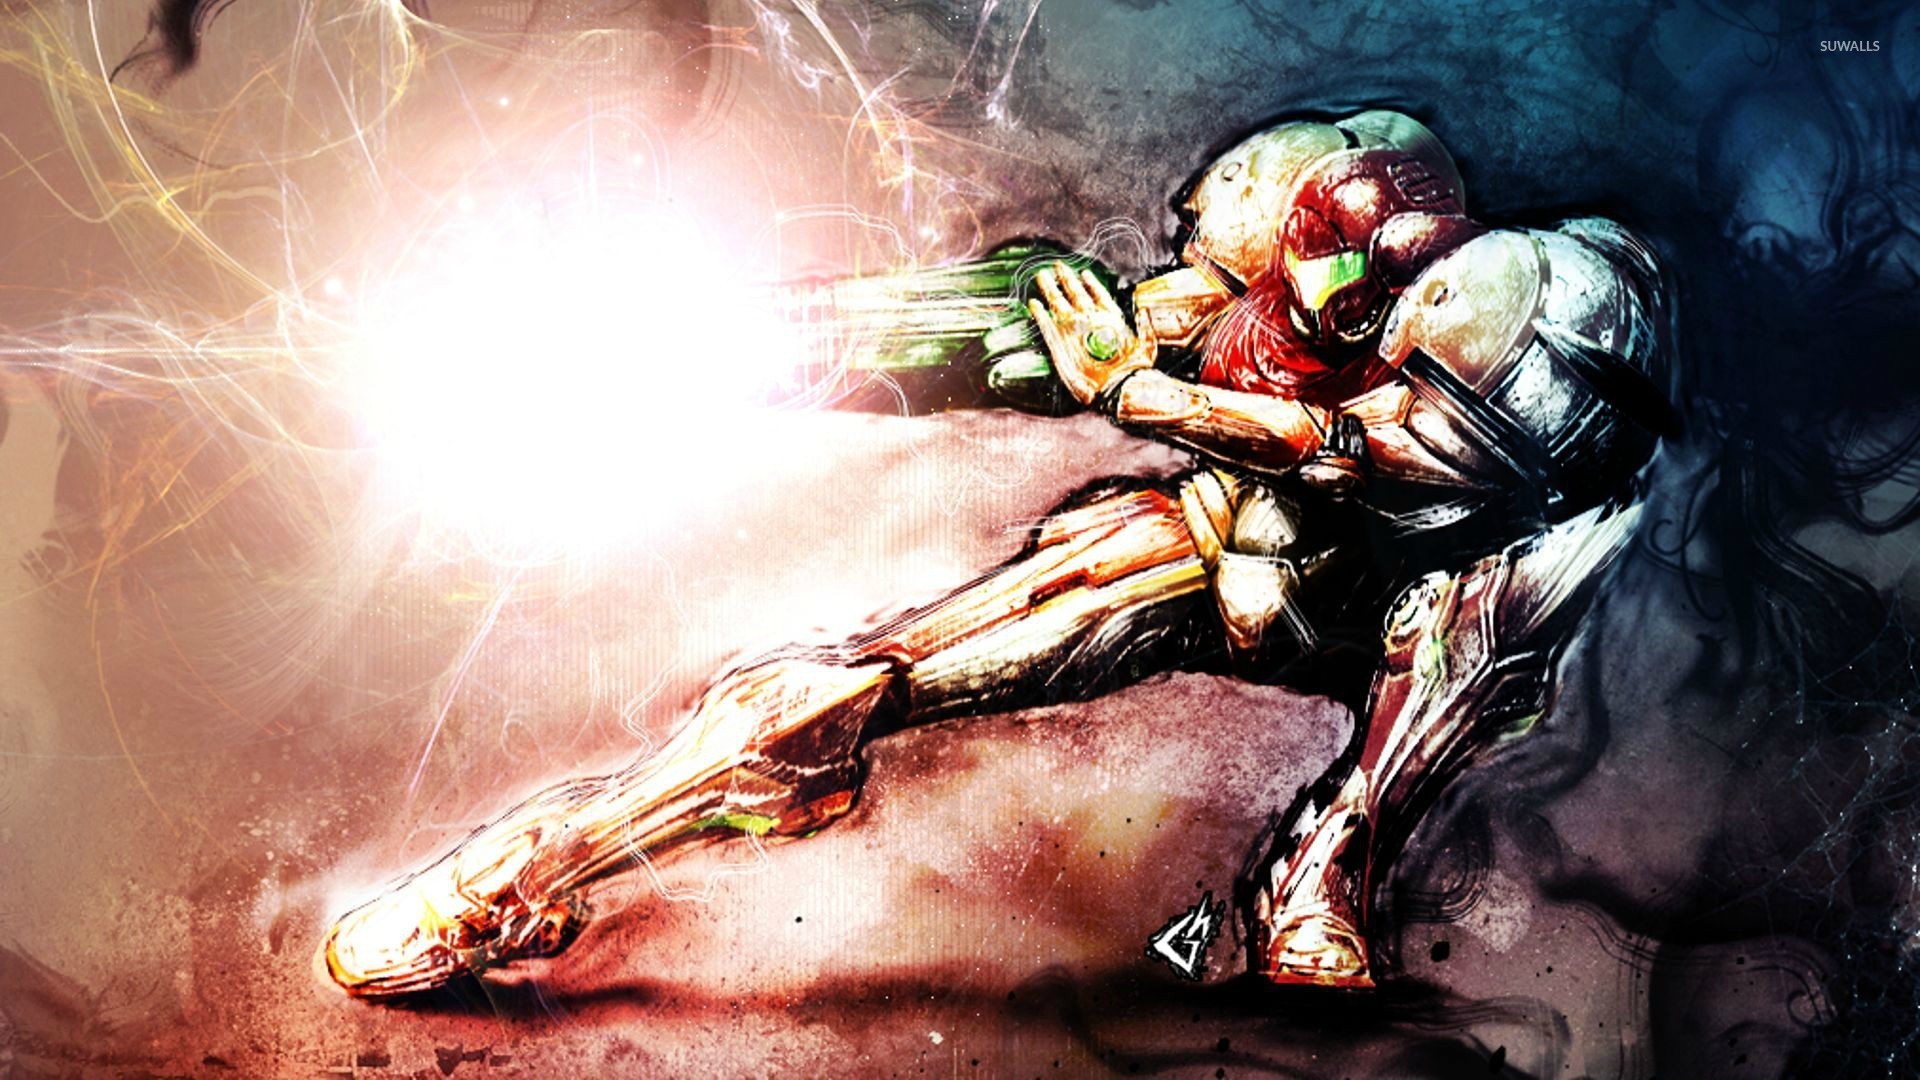 Share 76+ metroid wallpaper latest - in.cdgdbentre